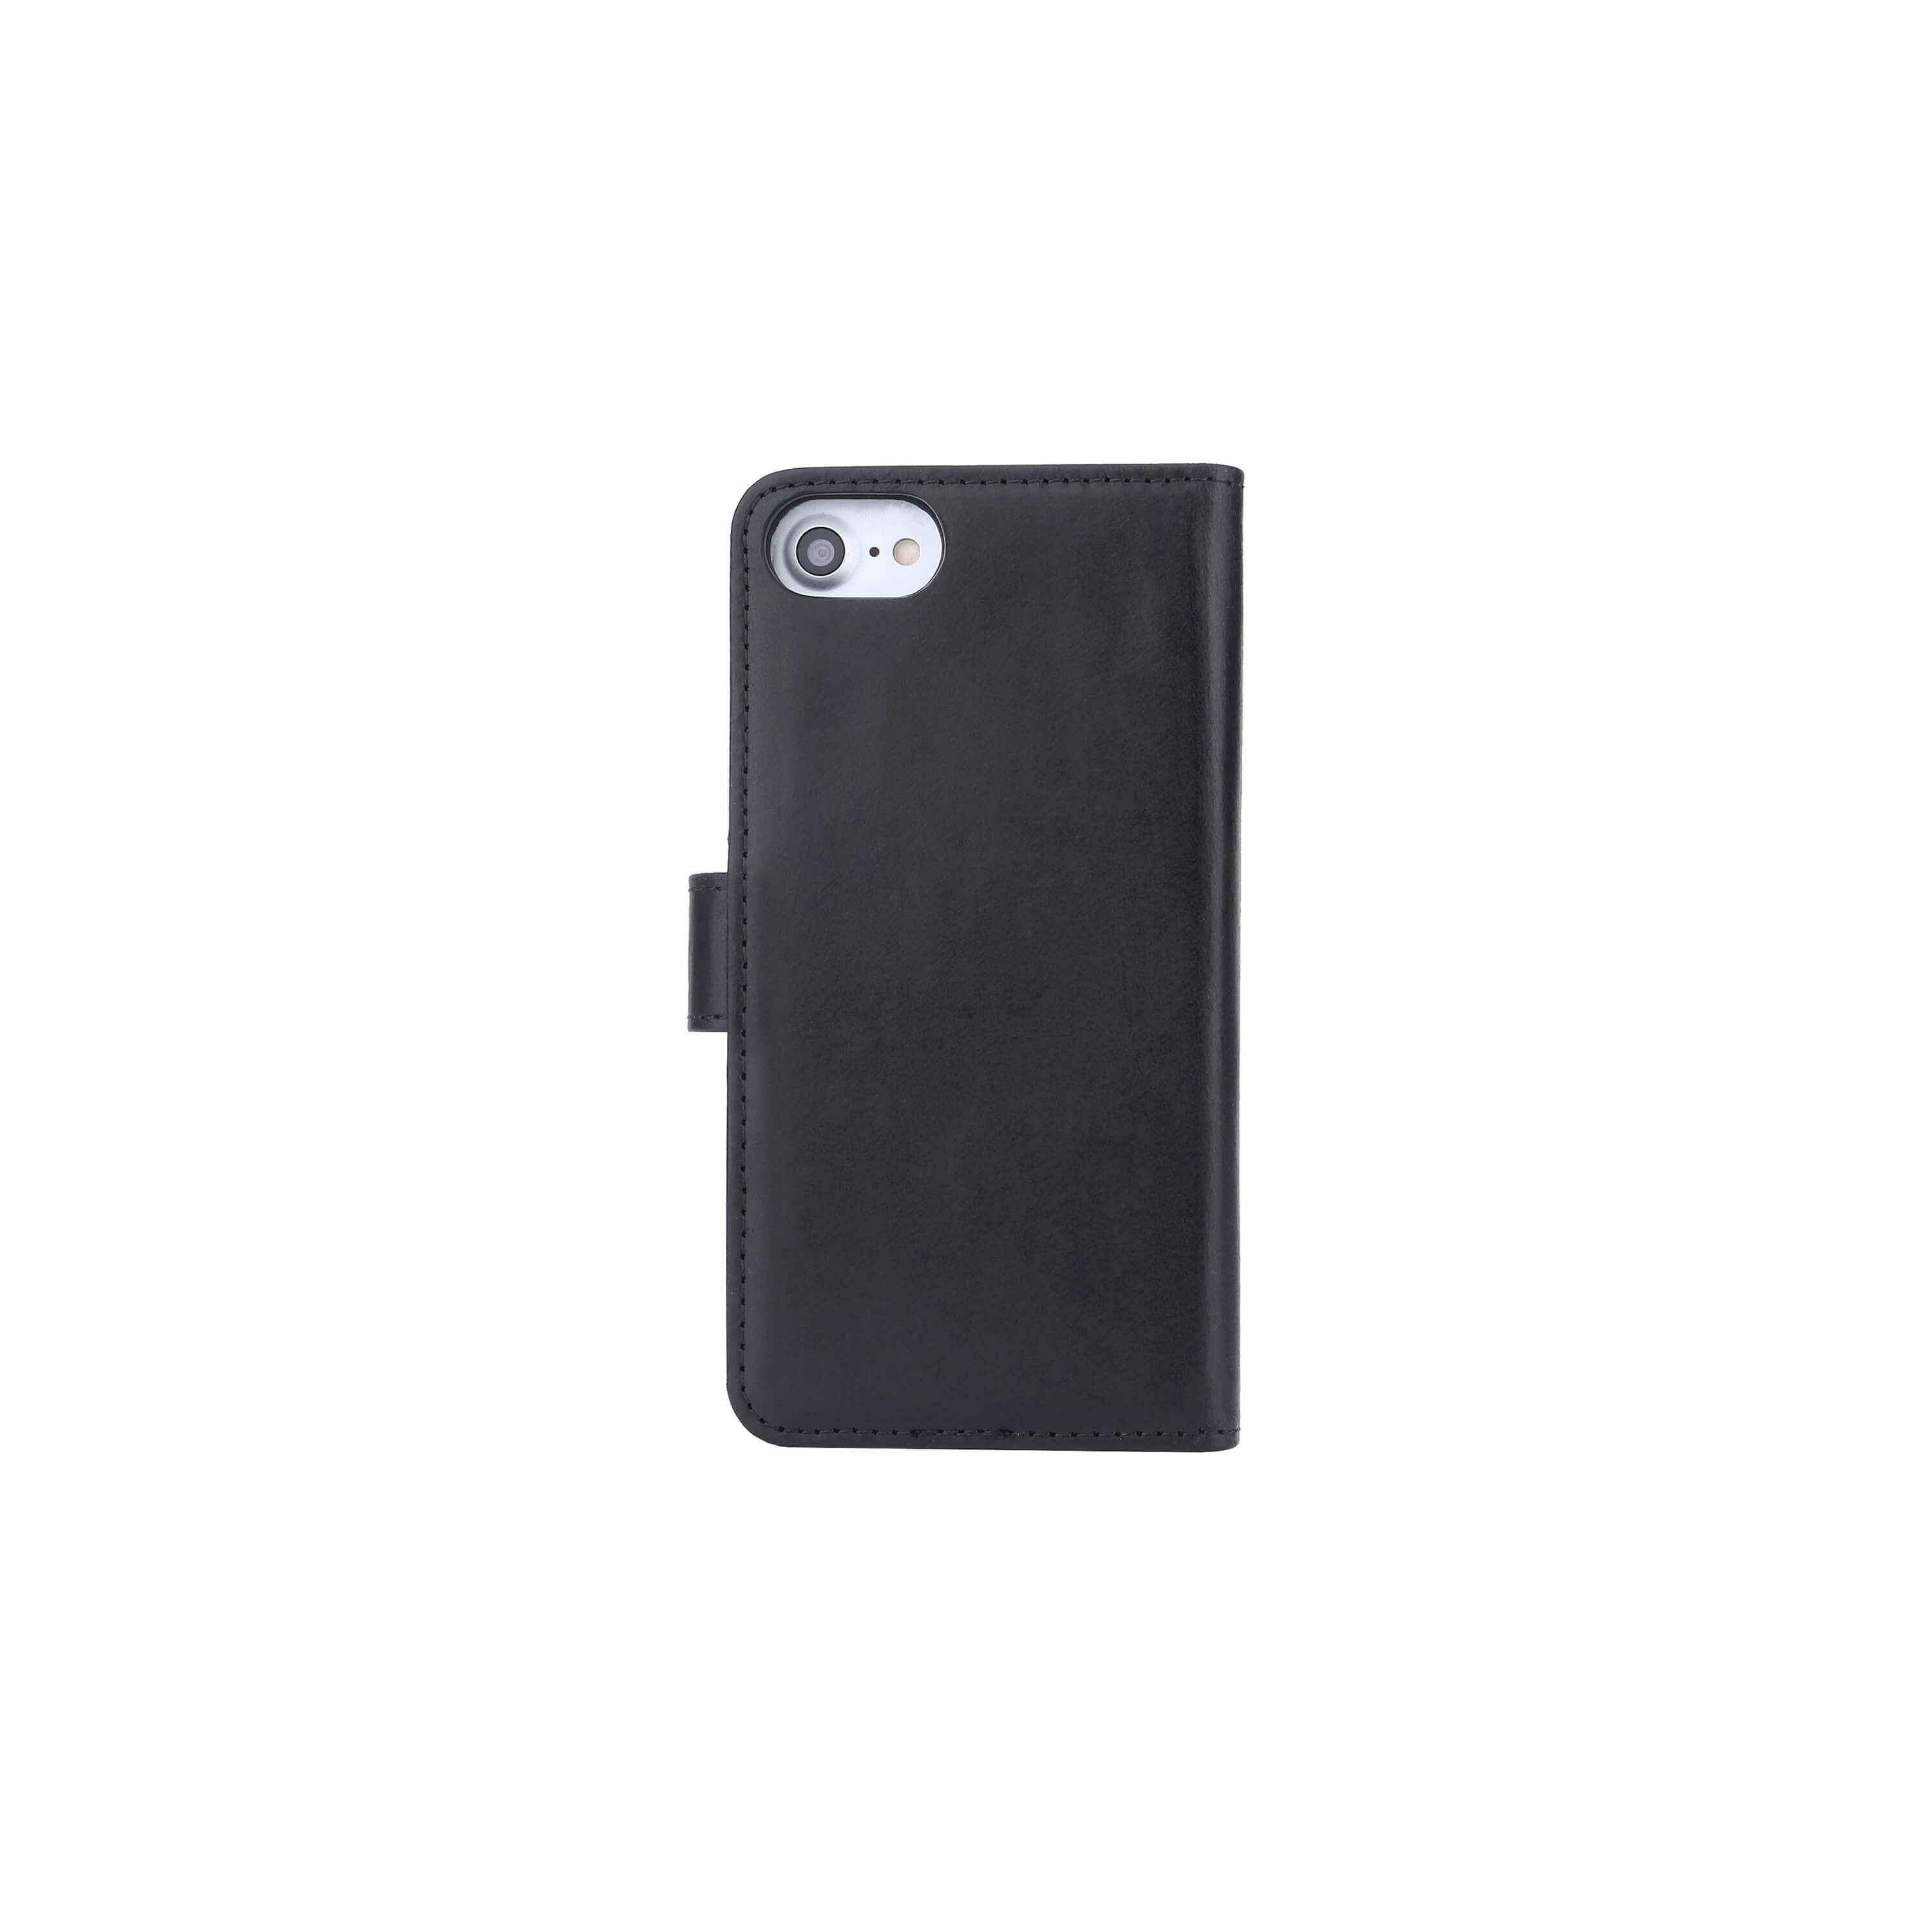 Radicover - Radiation protection wallet Leather iPhone 6/7/8 Exclusive 2in1